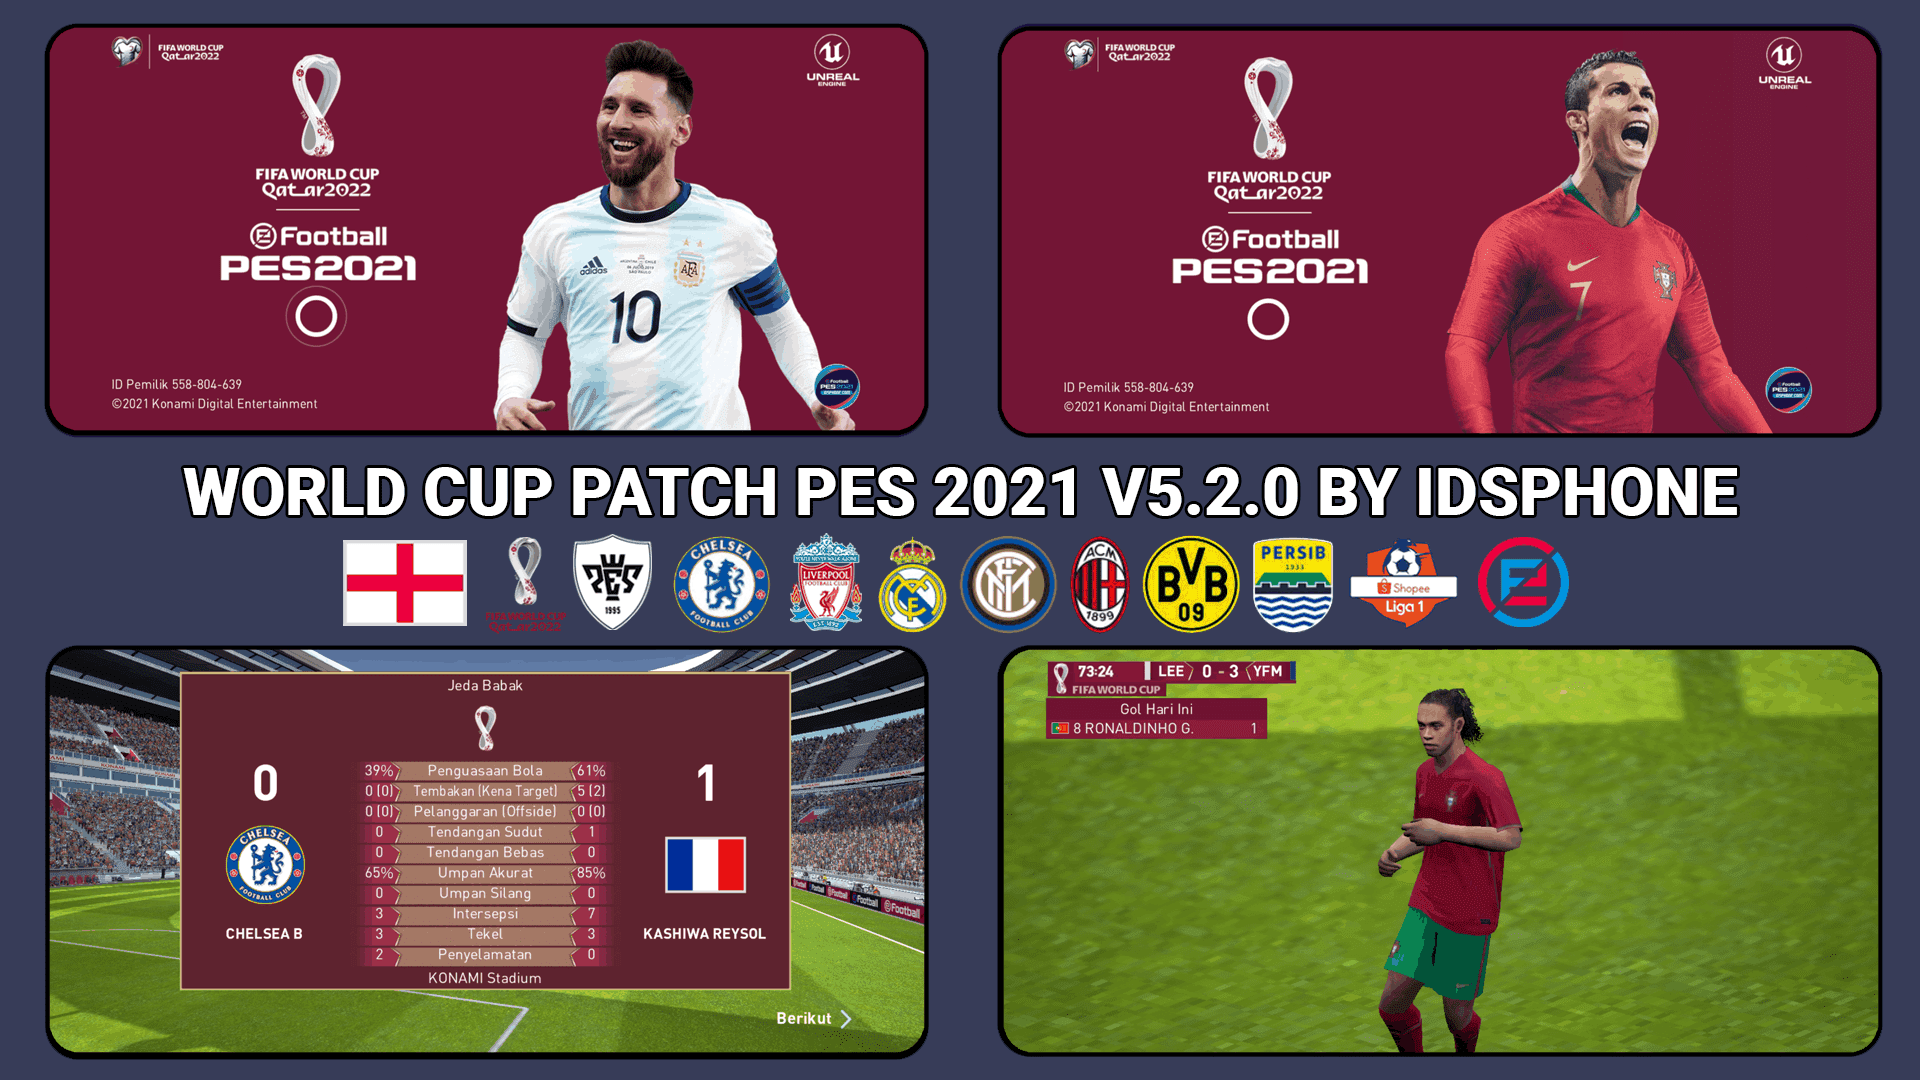 WORLD CUP 2022 PATCH PES 21 MOBILE V5.2.0 BY IDSPHONE - PATCH PES MOBILE